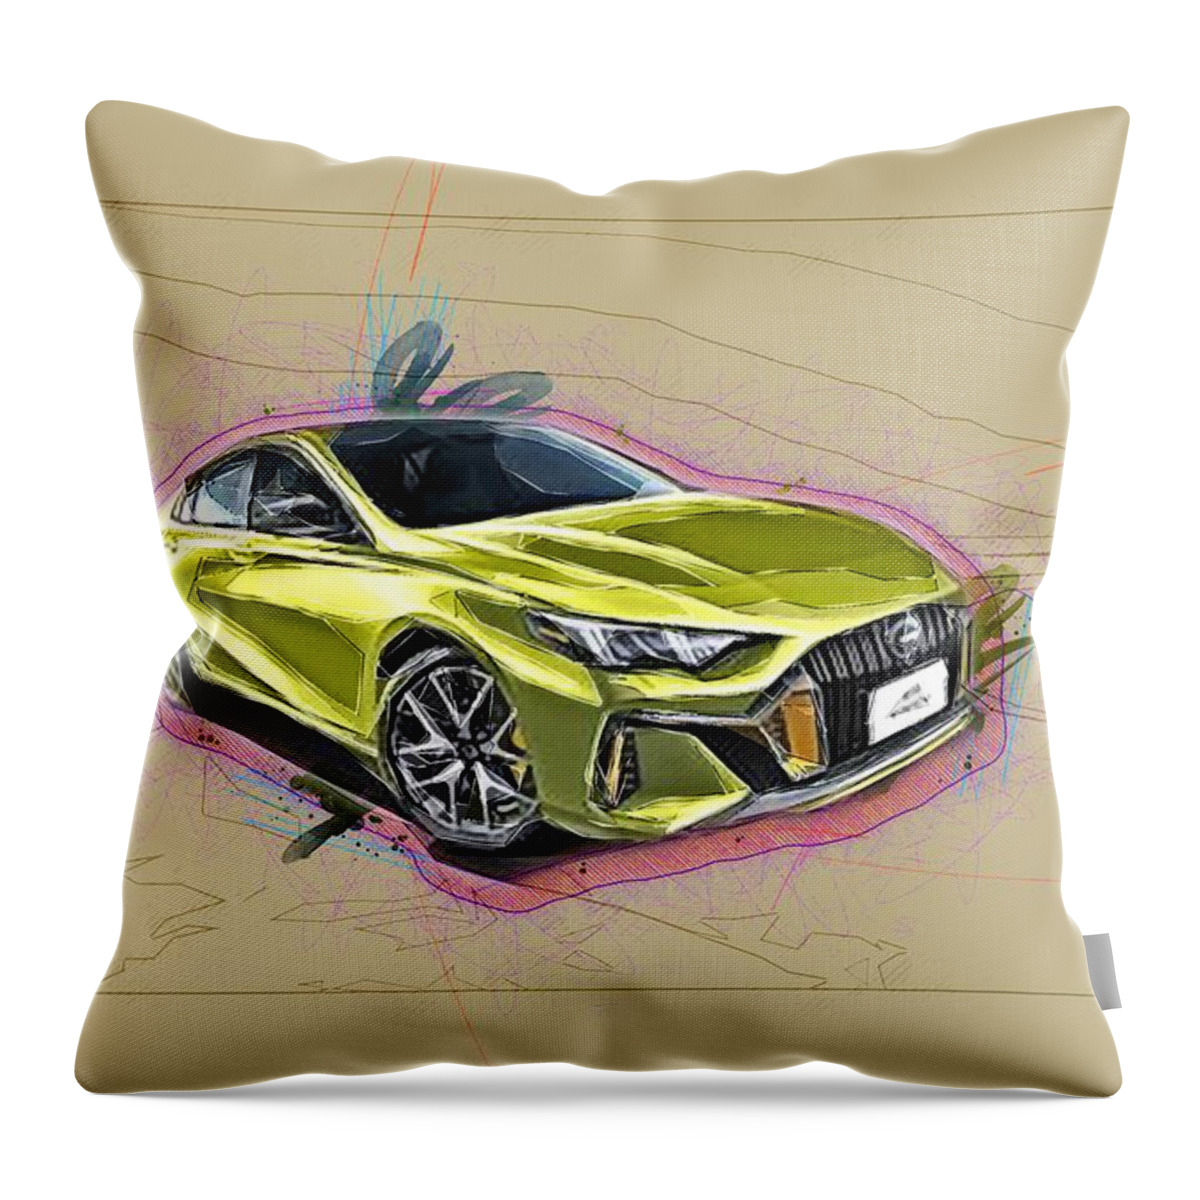  Throw Pillow featuring the mixed media Trumpchi Empow55 S Studio 2021 Cars Gac Group Empow Chinese by Ola Kunde